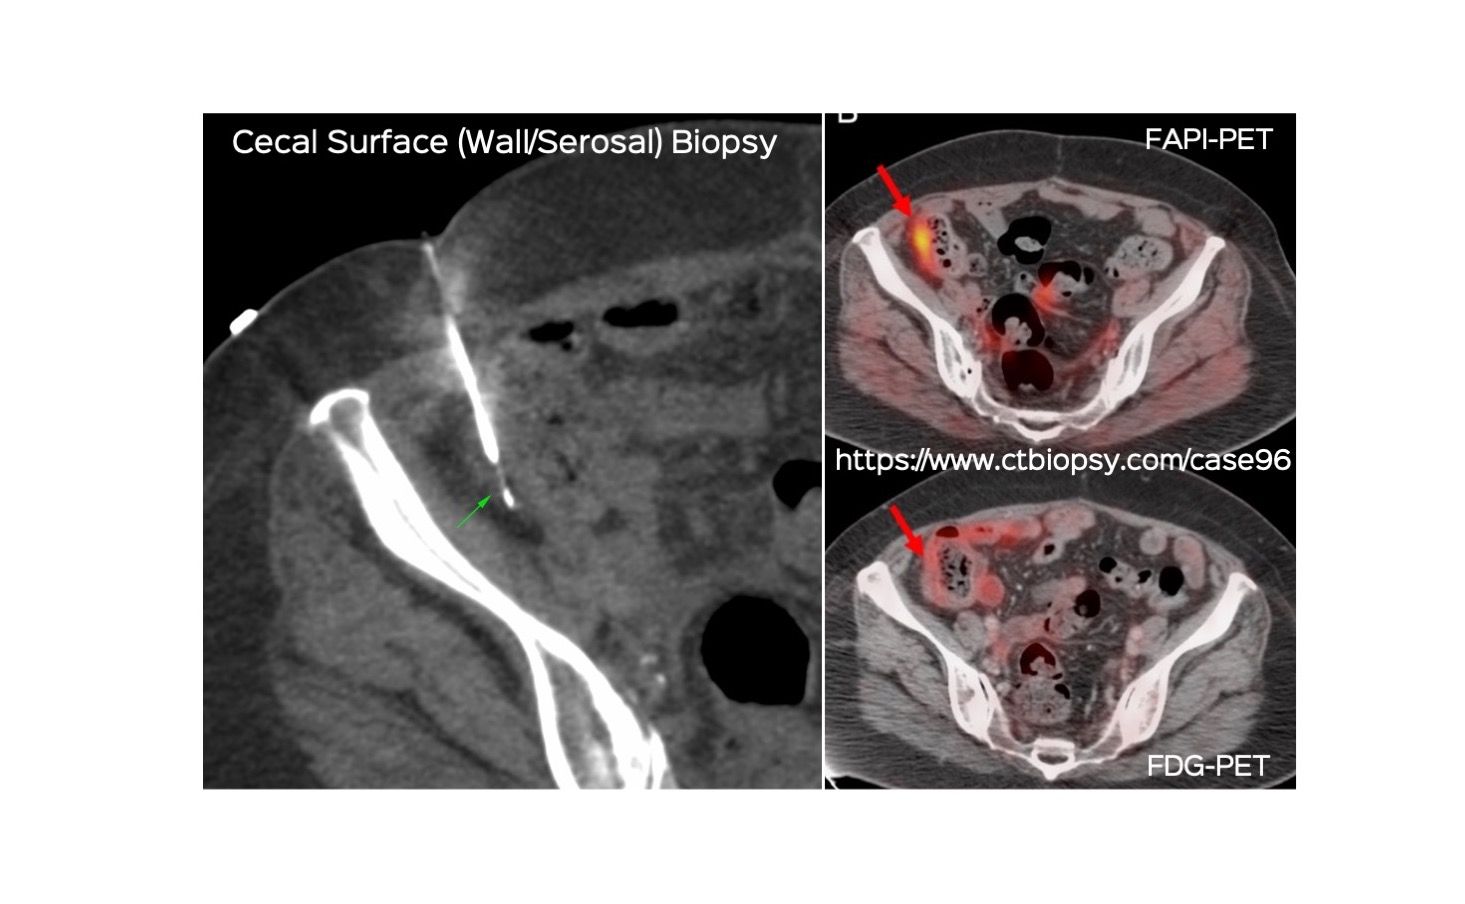 Case 96: Cecal Surface (Serosal/Wall) Biopsy (…and the value of FAPI-PET)